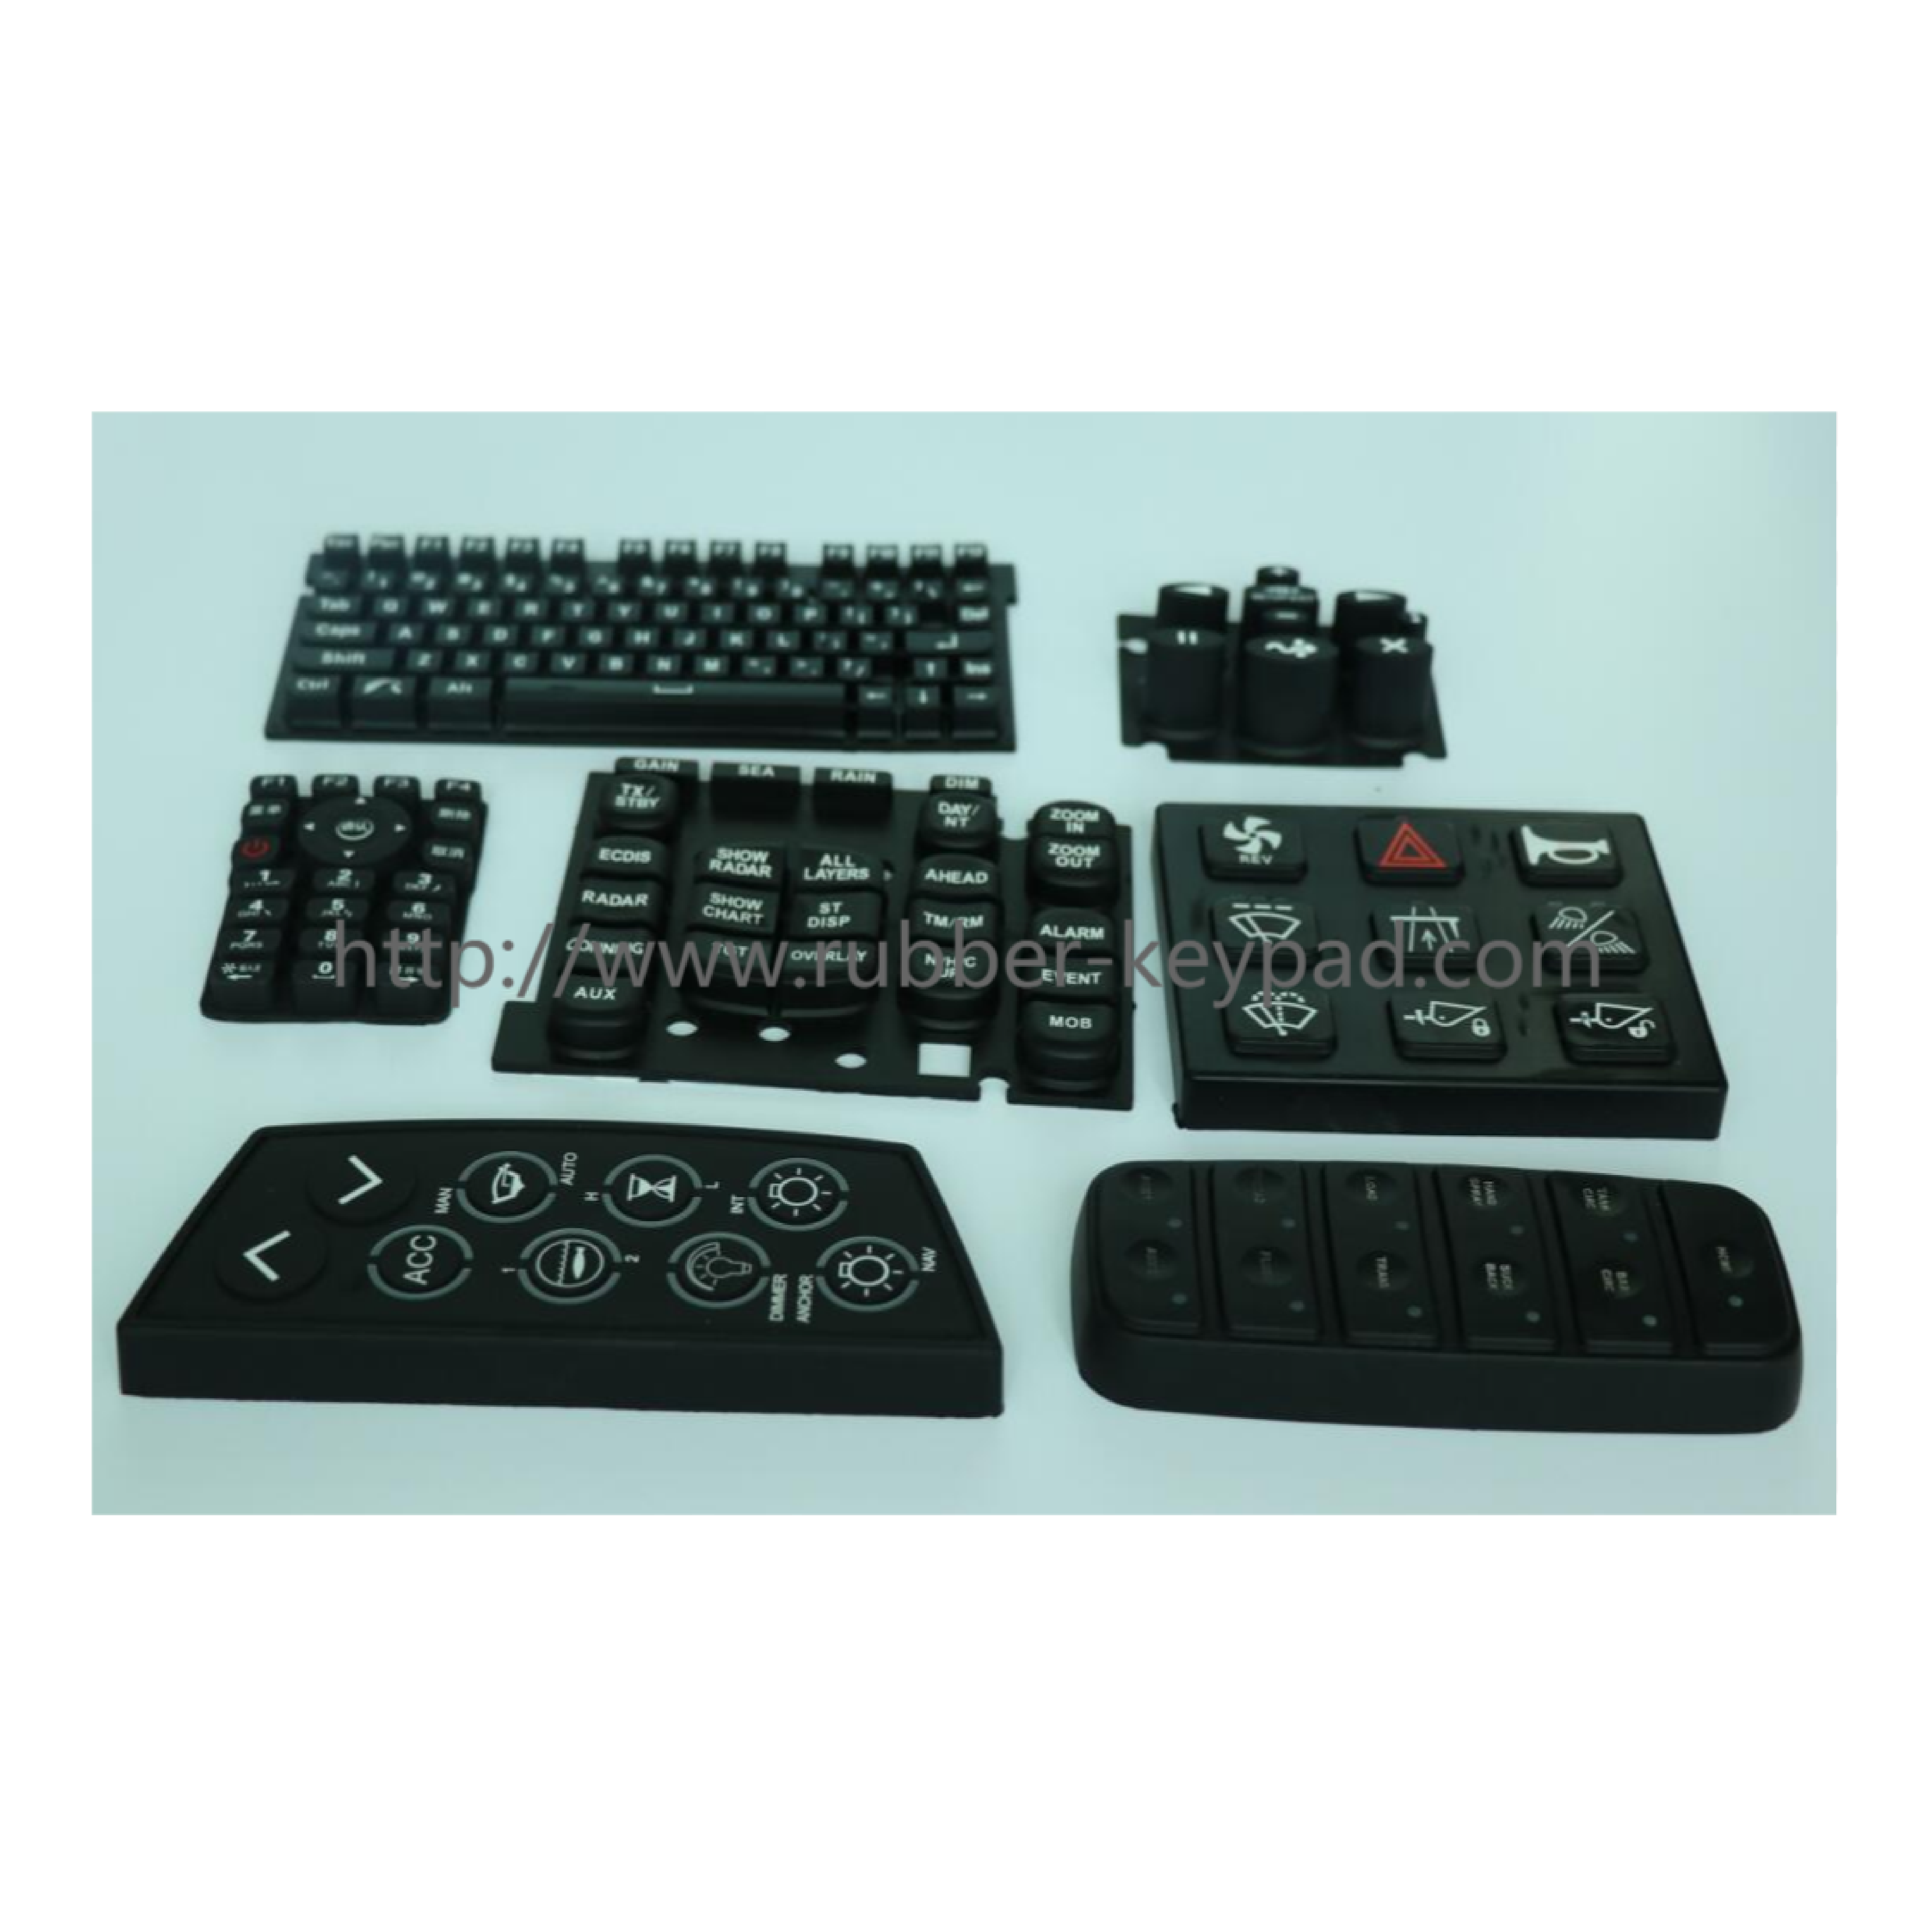 Why is Plastic Rubber Keyboard Widespread Used?